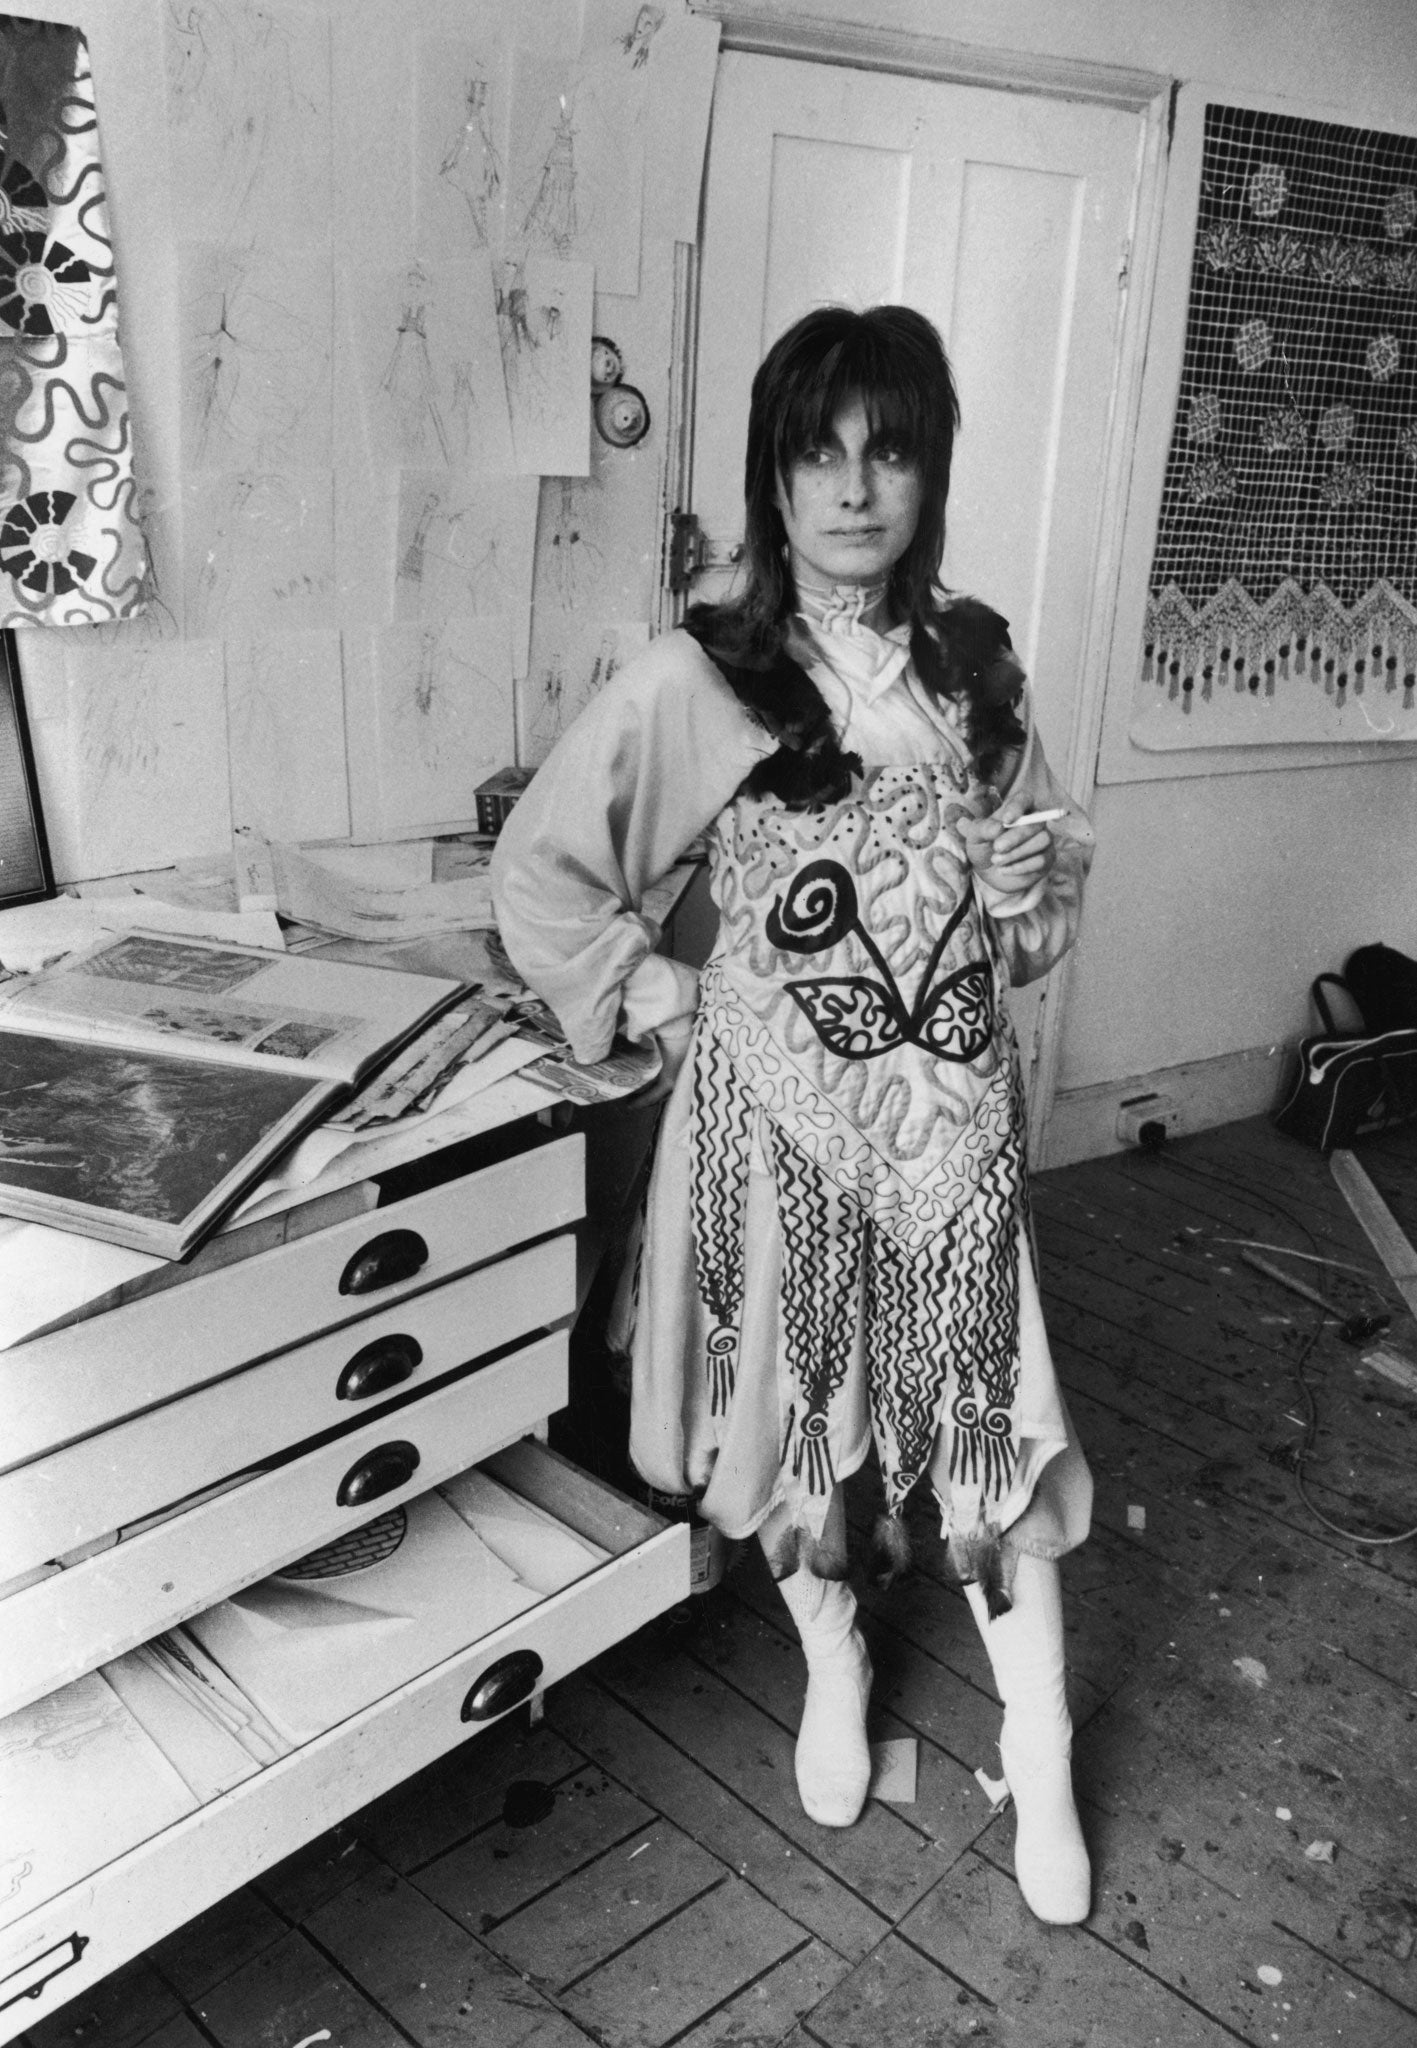 Zandra Rhodes in 1970, the year after Diana Vreeland first featured her garments in Vogue